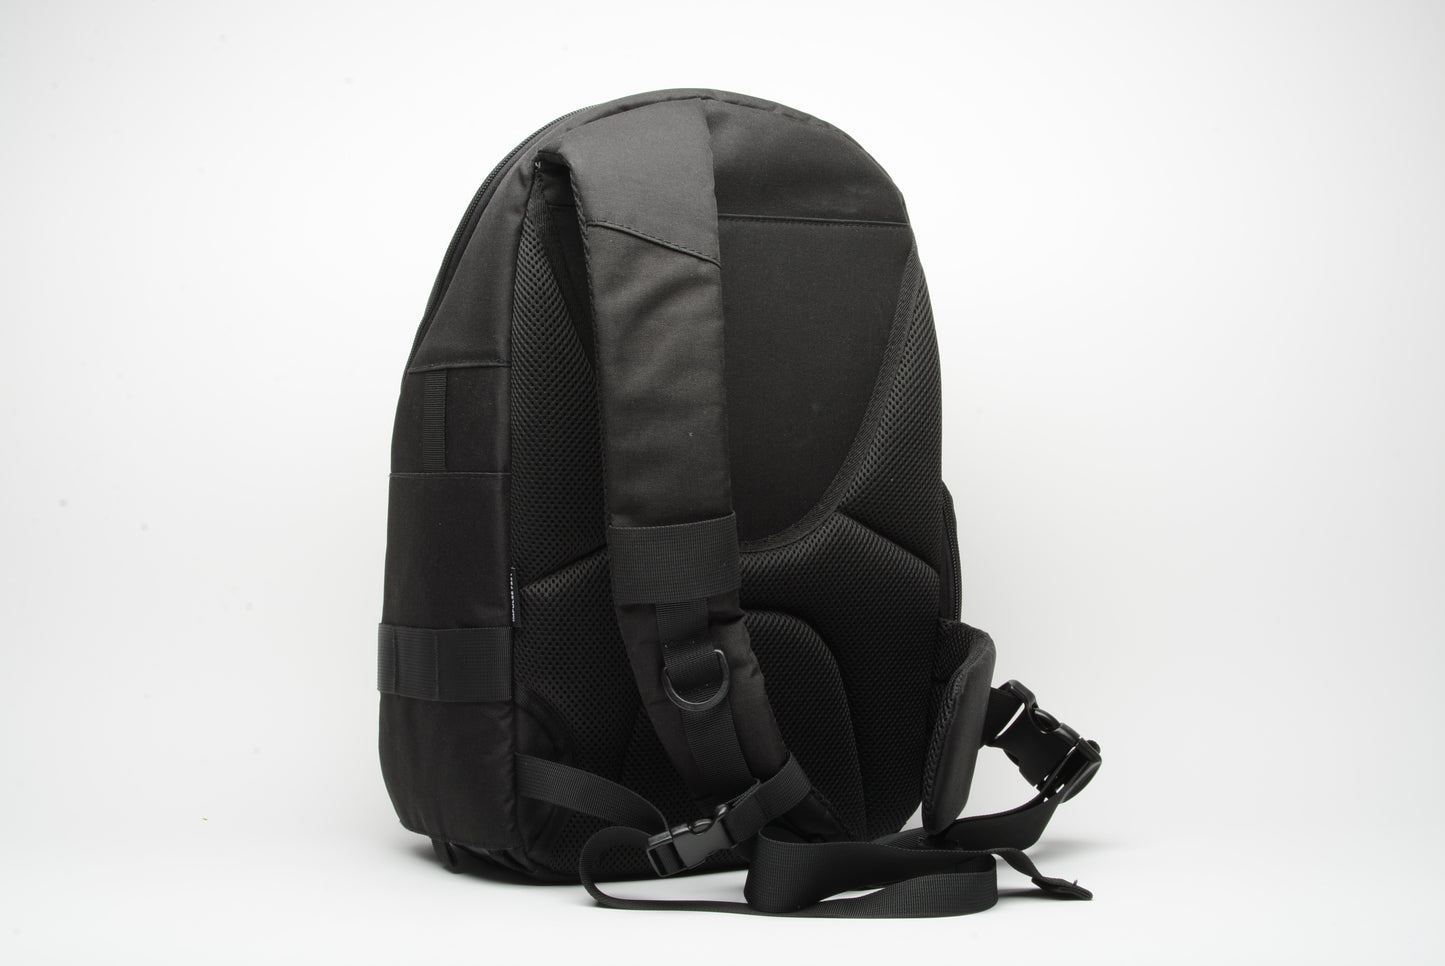 Promaster Impulse 7321 Photo backpack (black) very clean